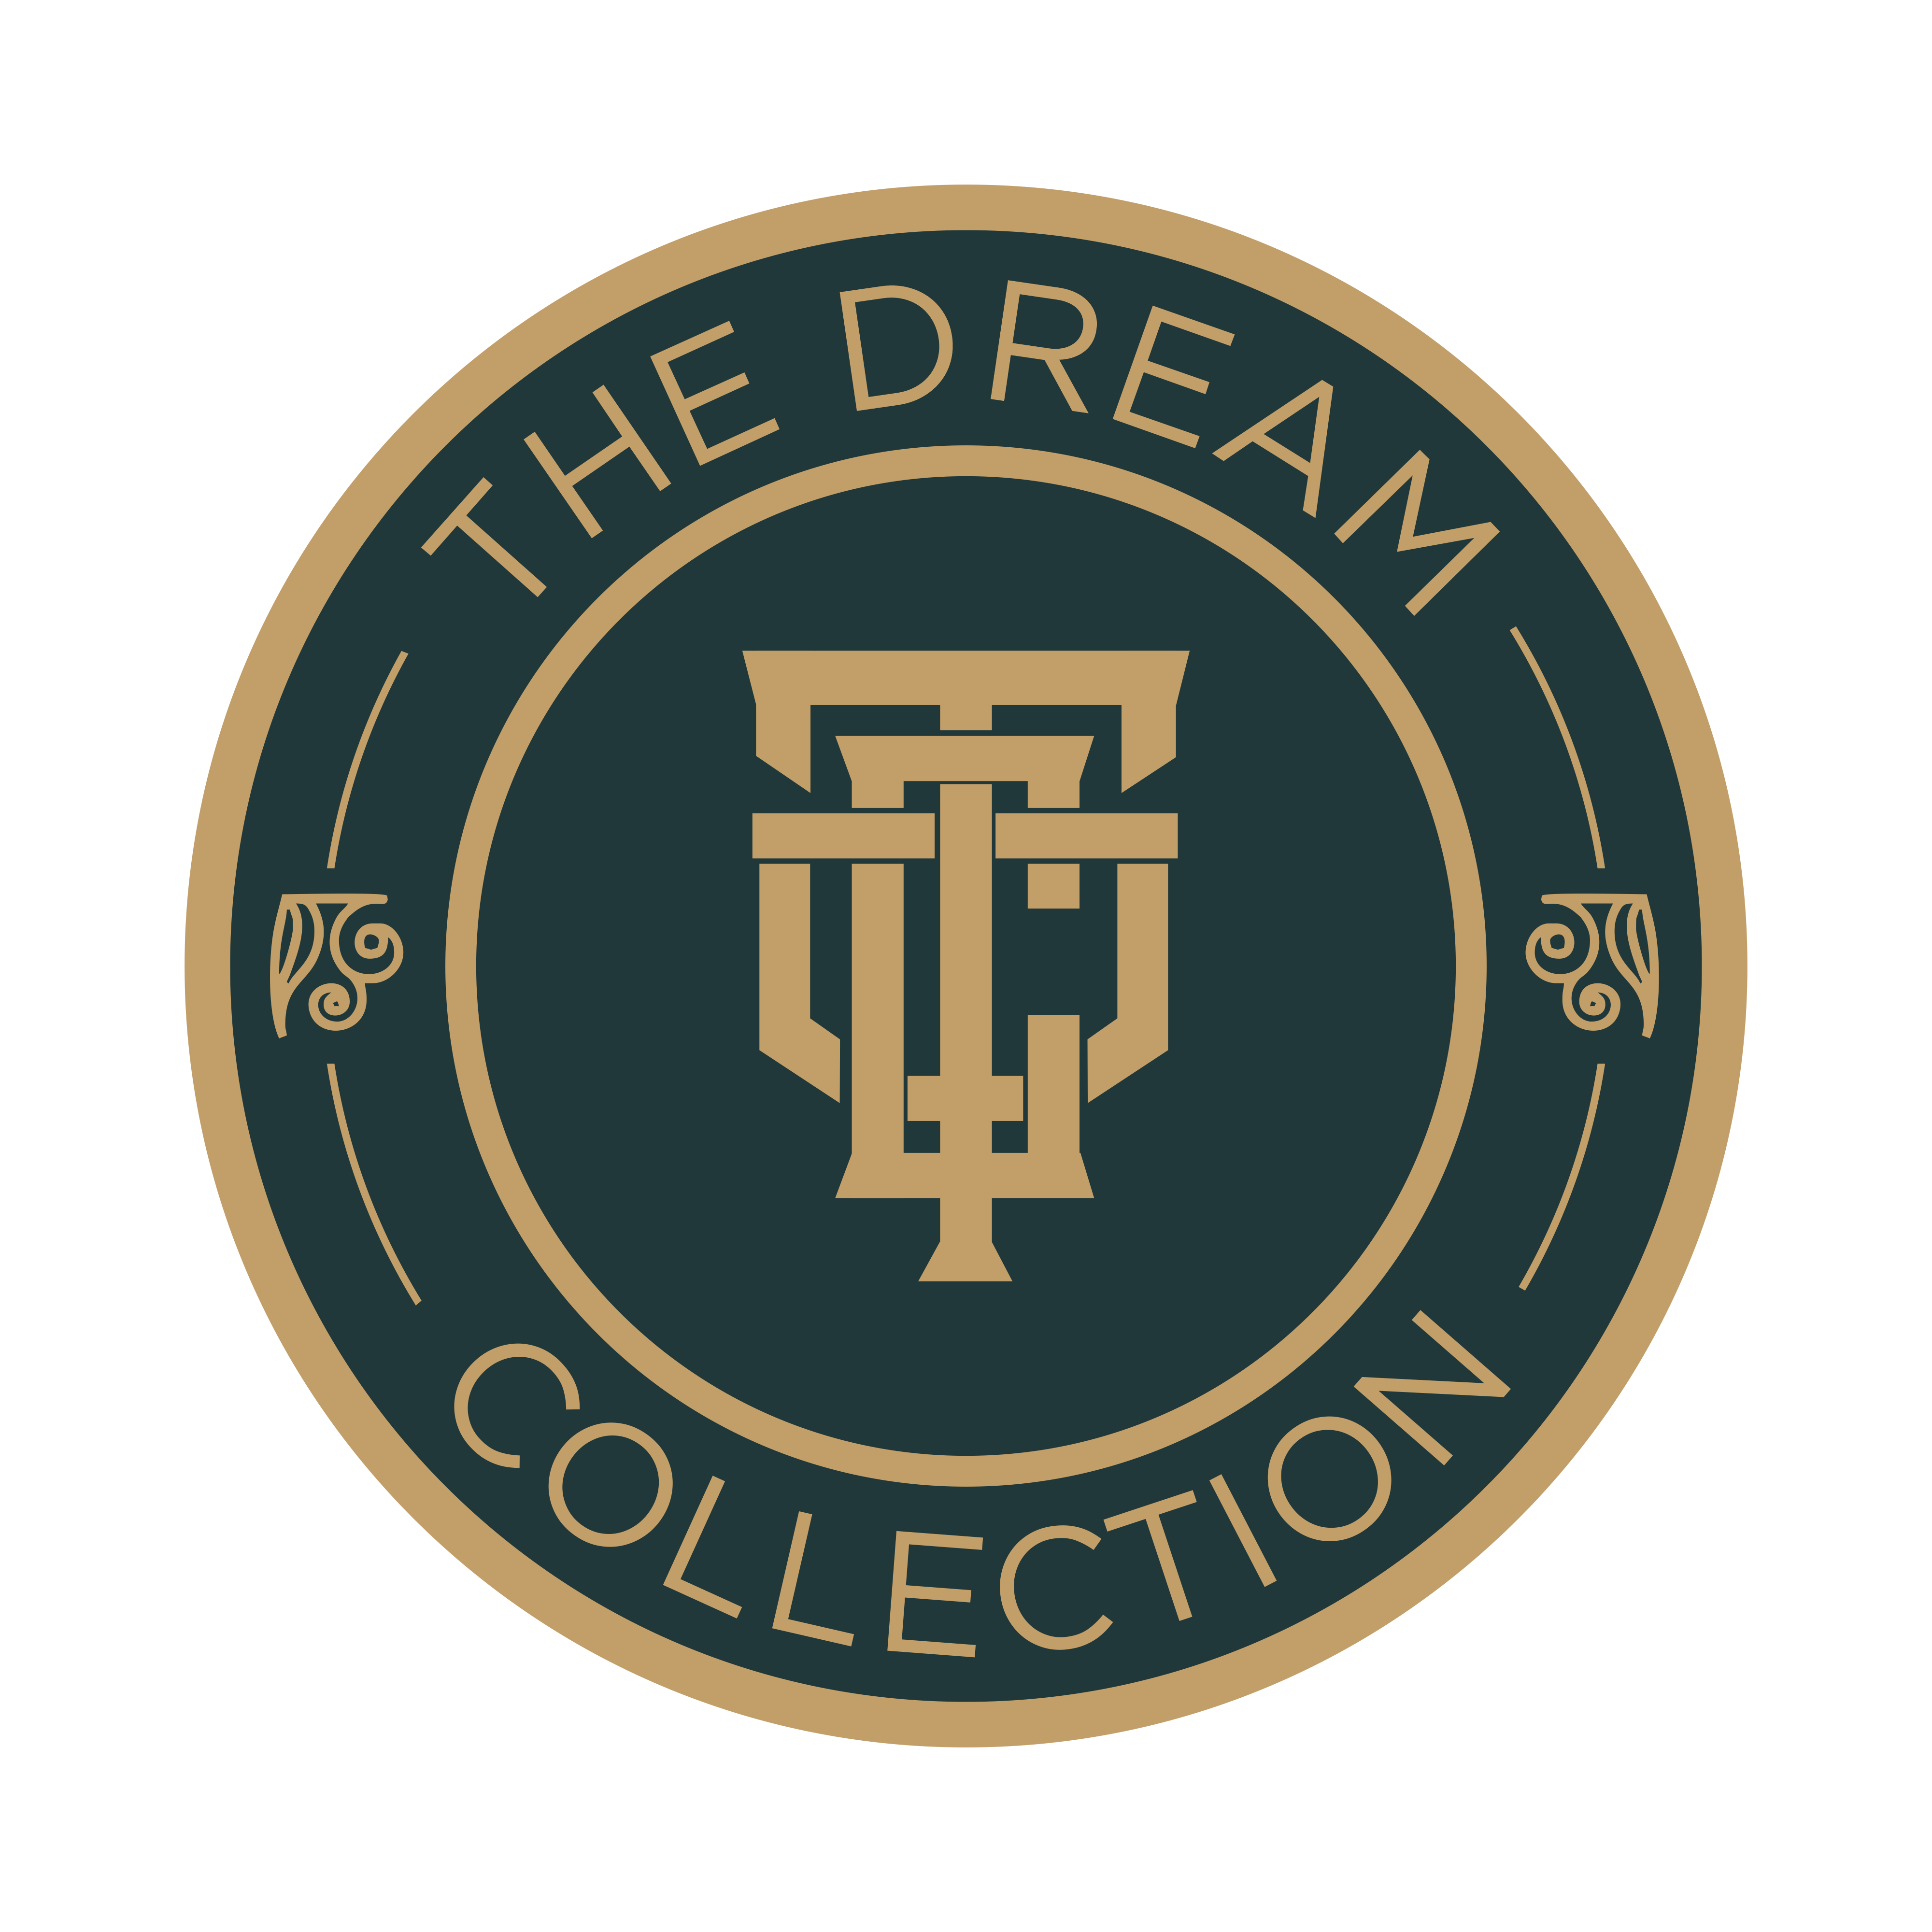 https://thedreamcollection.com.gh/wp-content/uploads/2023/04/THE-DREAM-COLLECTION-LOGO.png